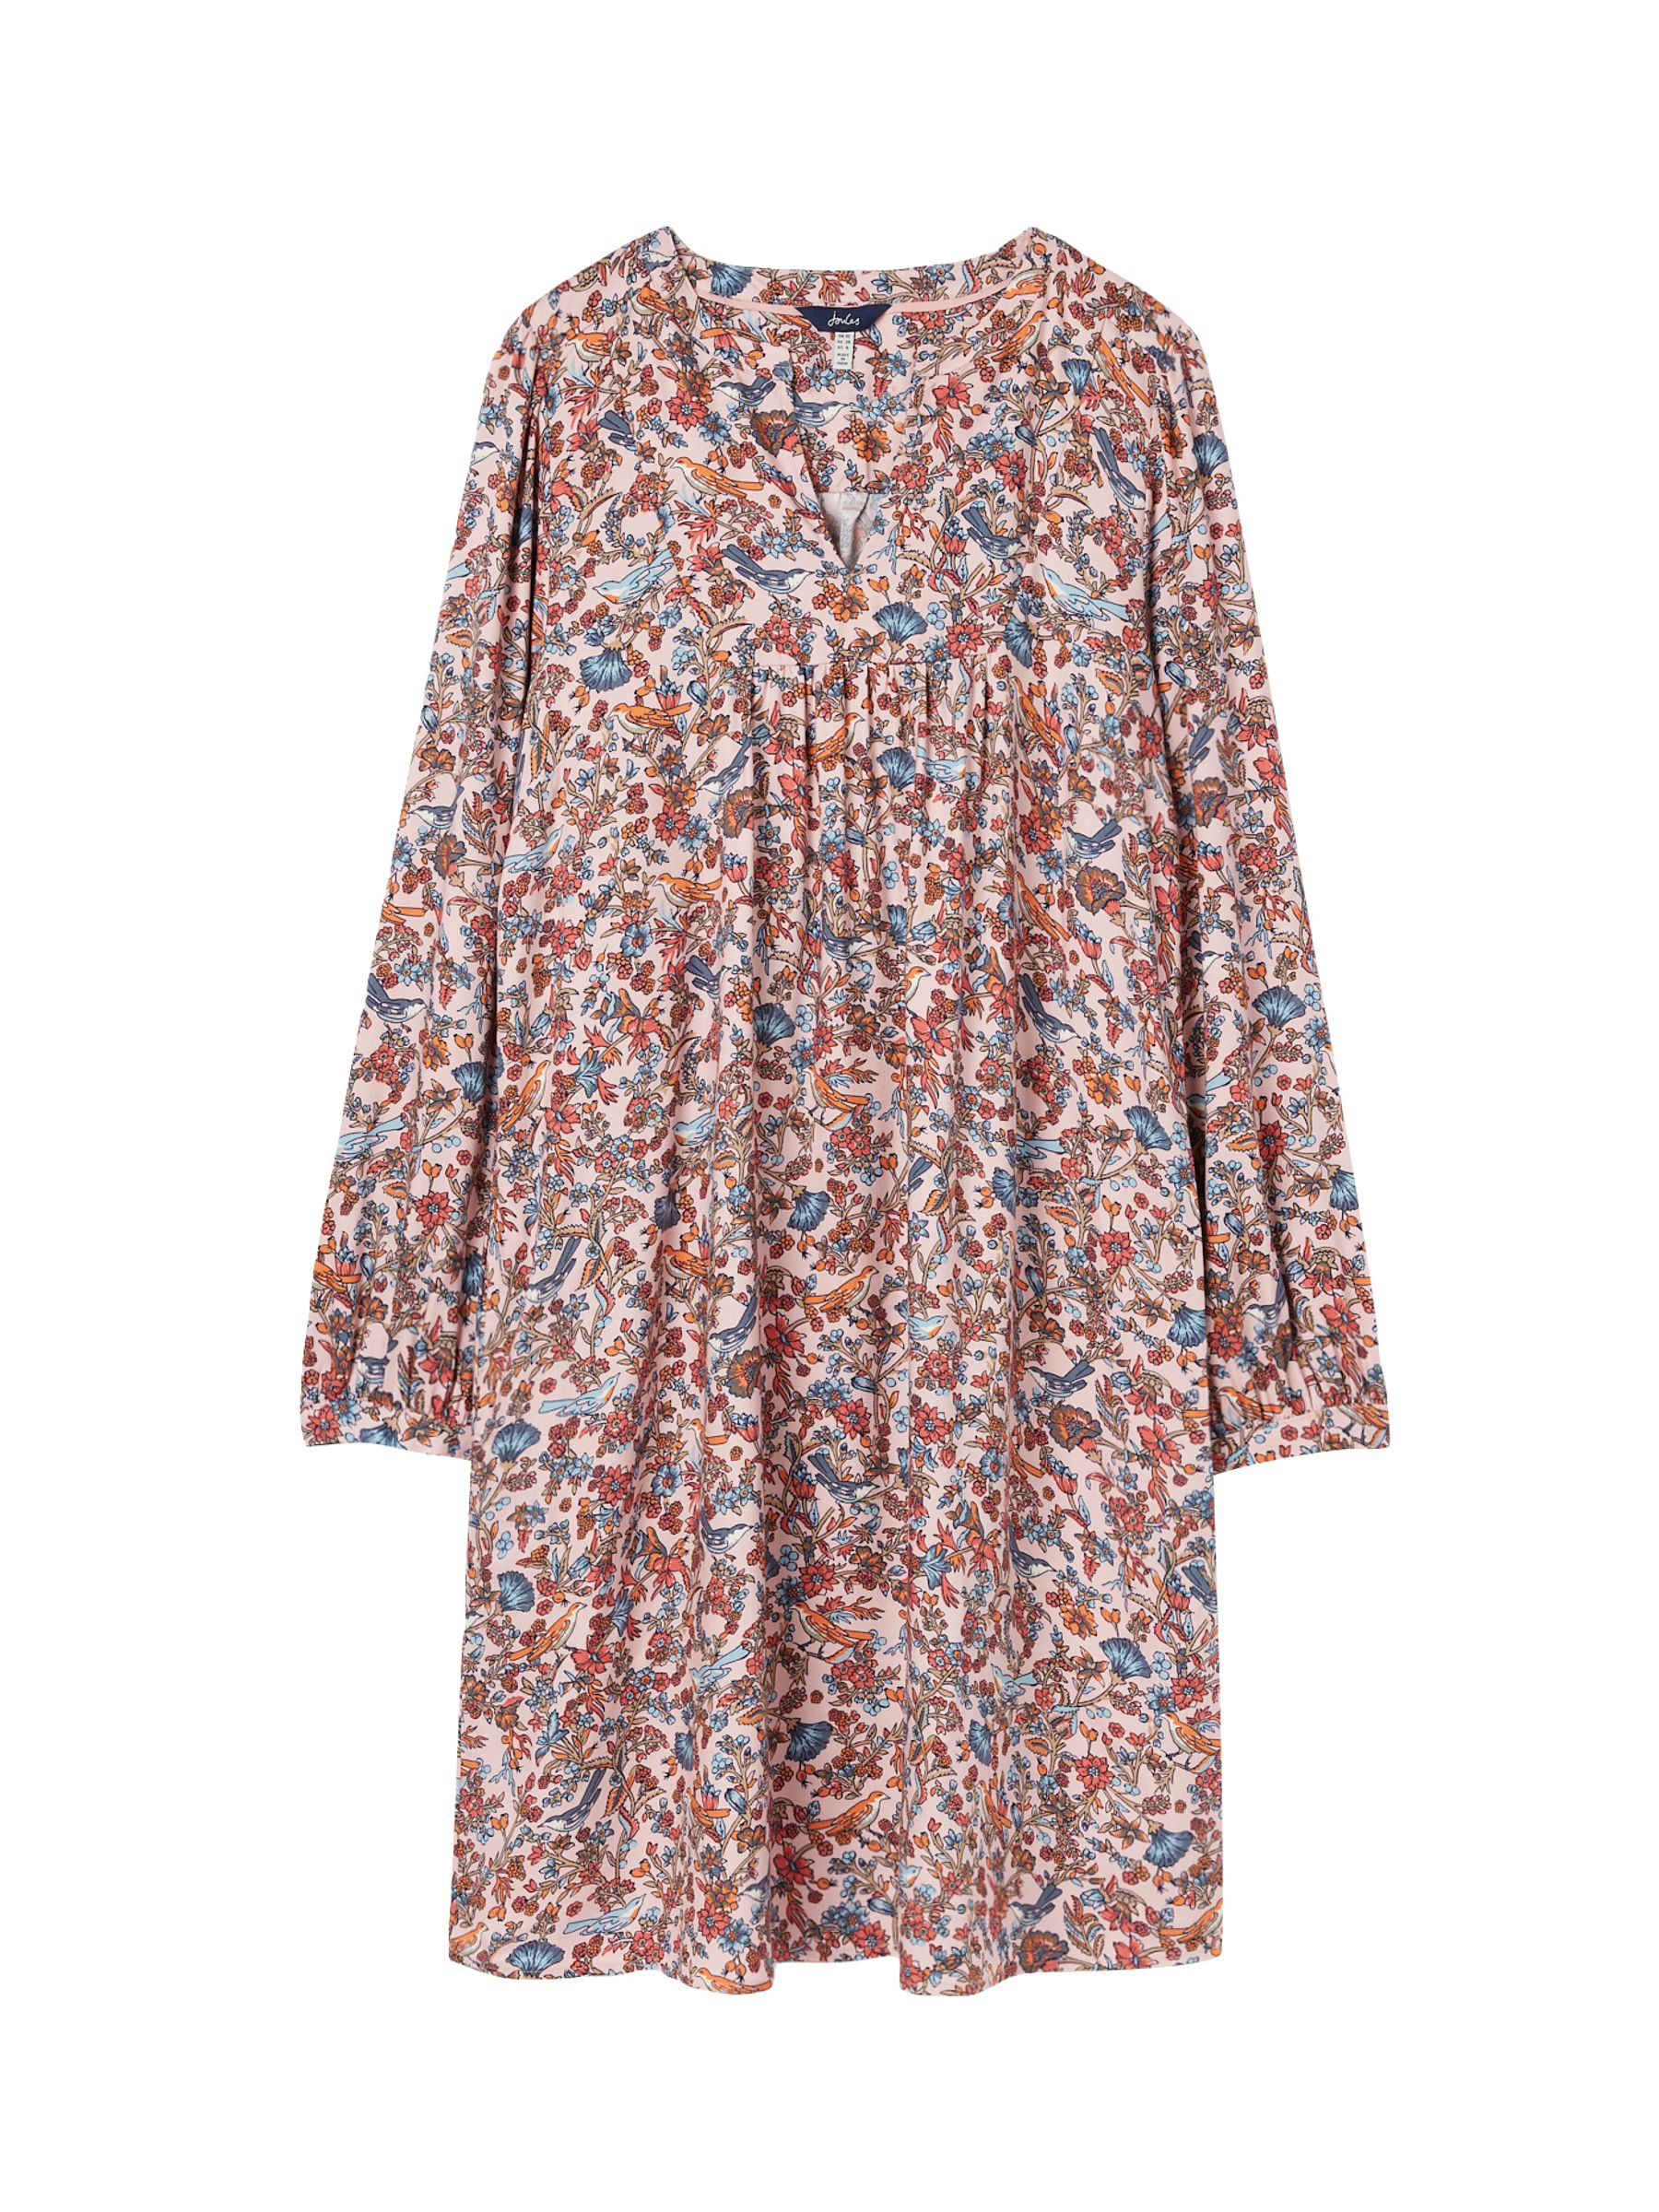 Buy Joules Savannah Twill Mini Dress from the Joules online shop